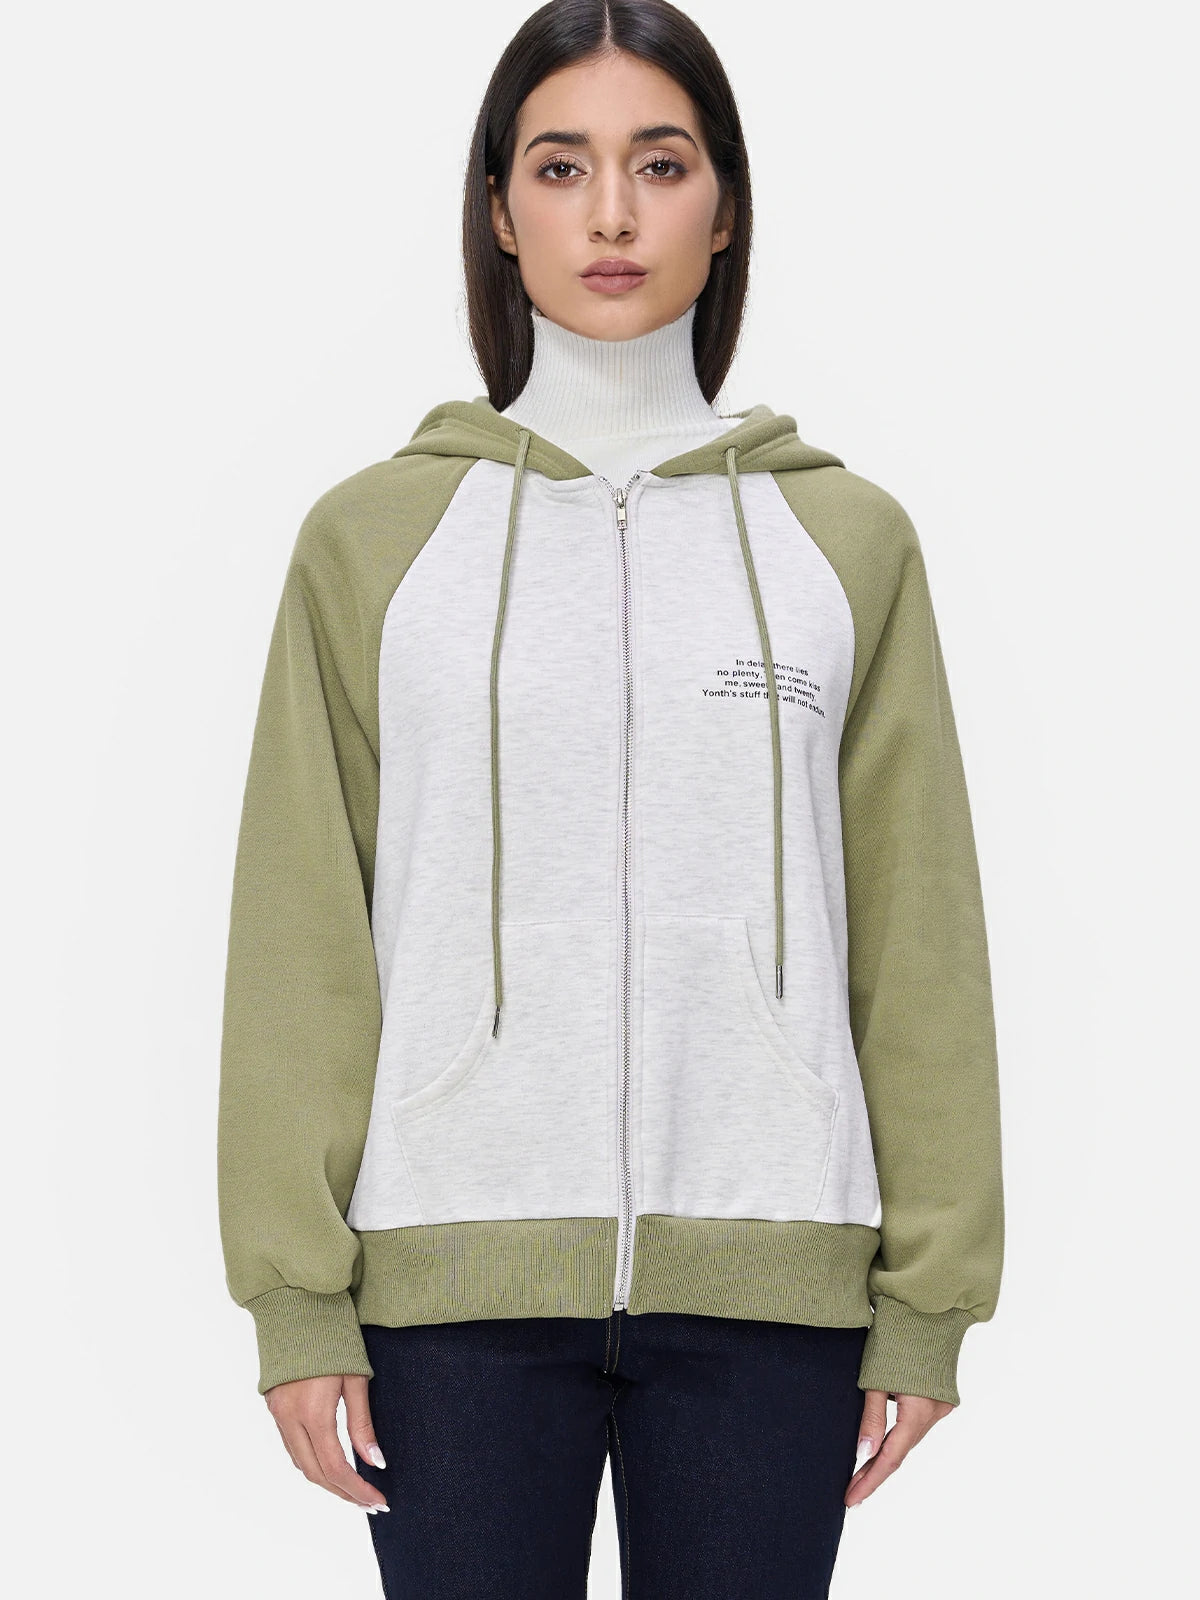 Cleverly designed pocketed zip-up sweatshirt